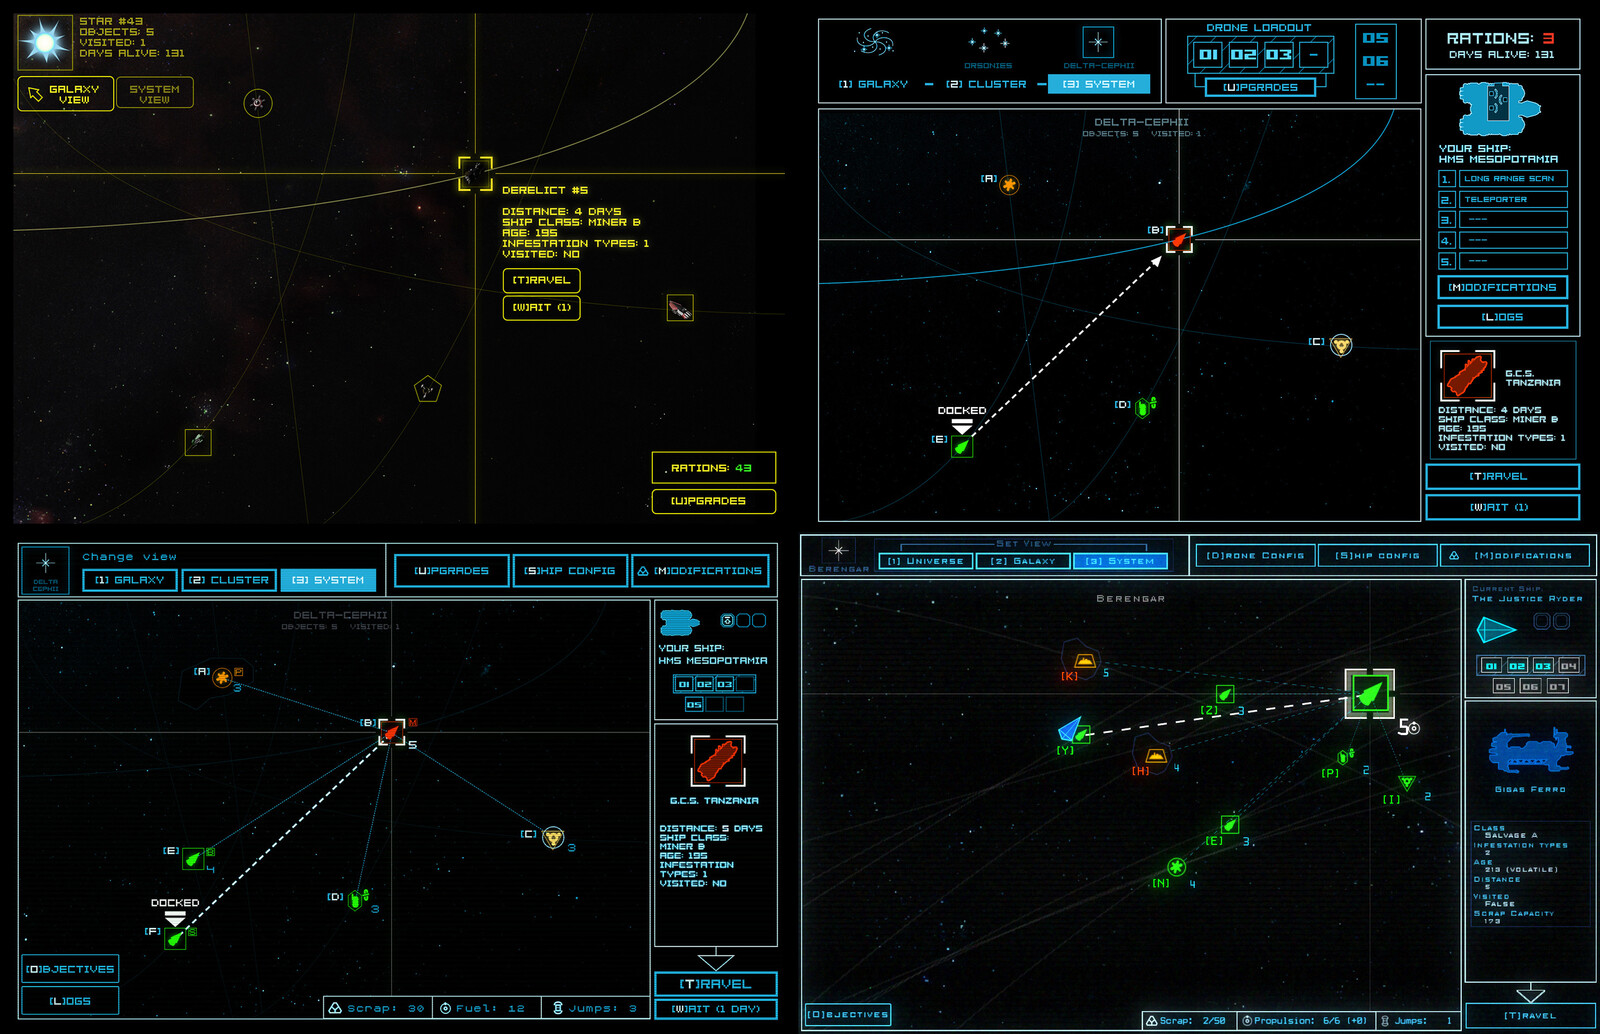 Evolution of the "galaxy map" screen from early mockup to final in-game implementation.